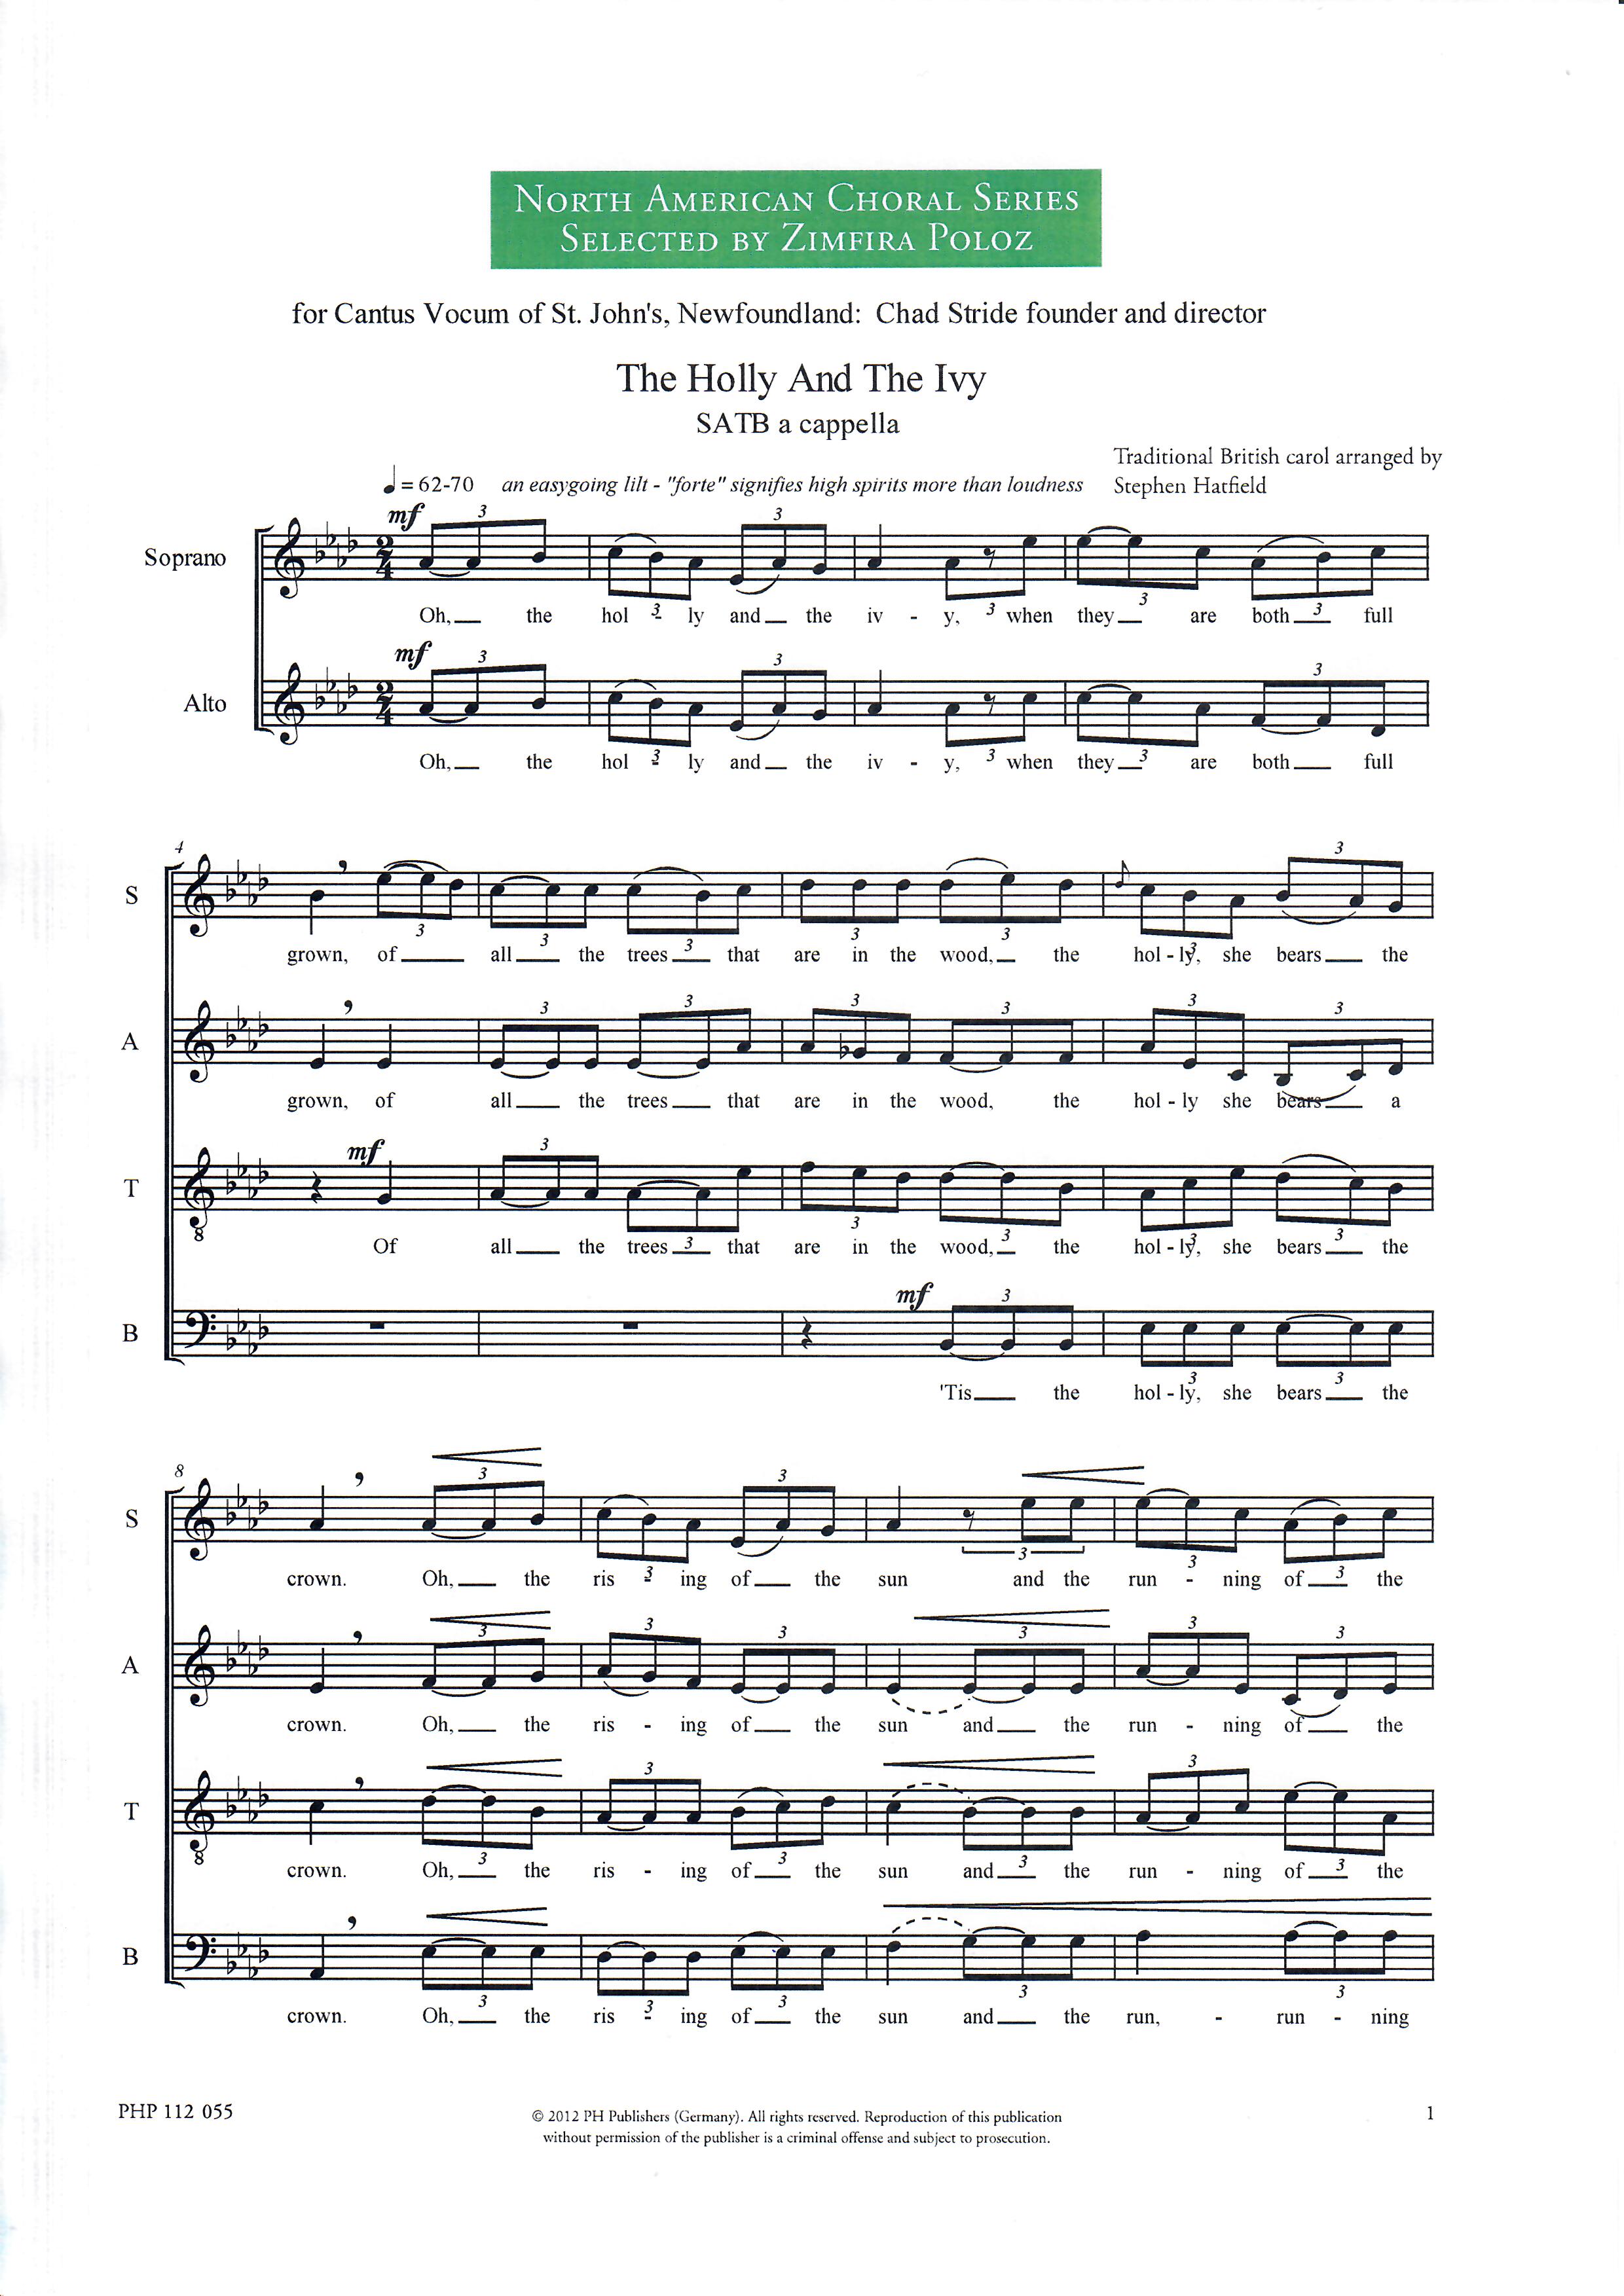 The Holly and the Ivy - Show sample score